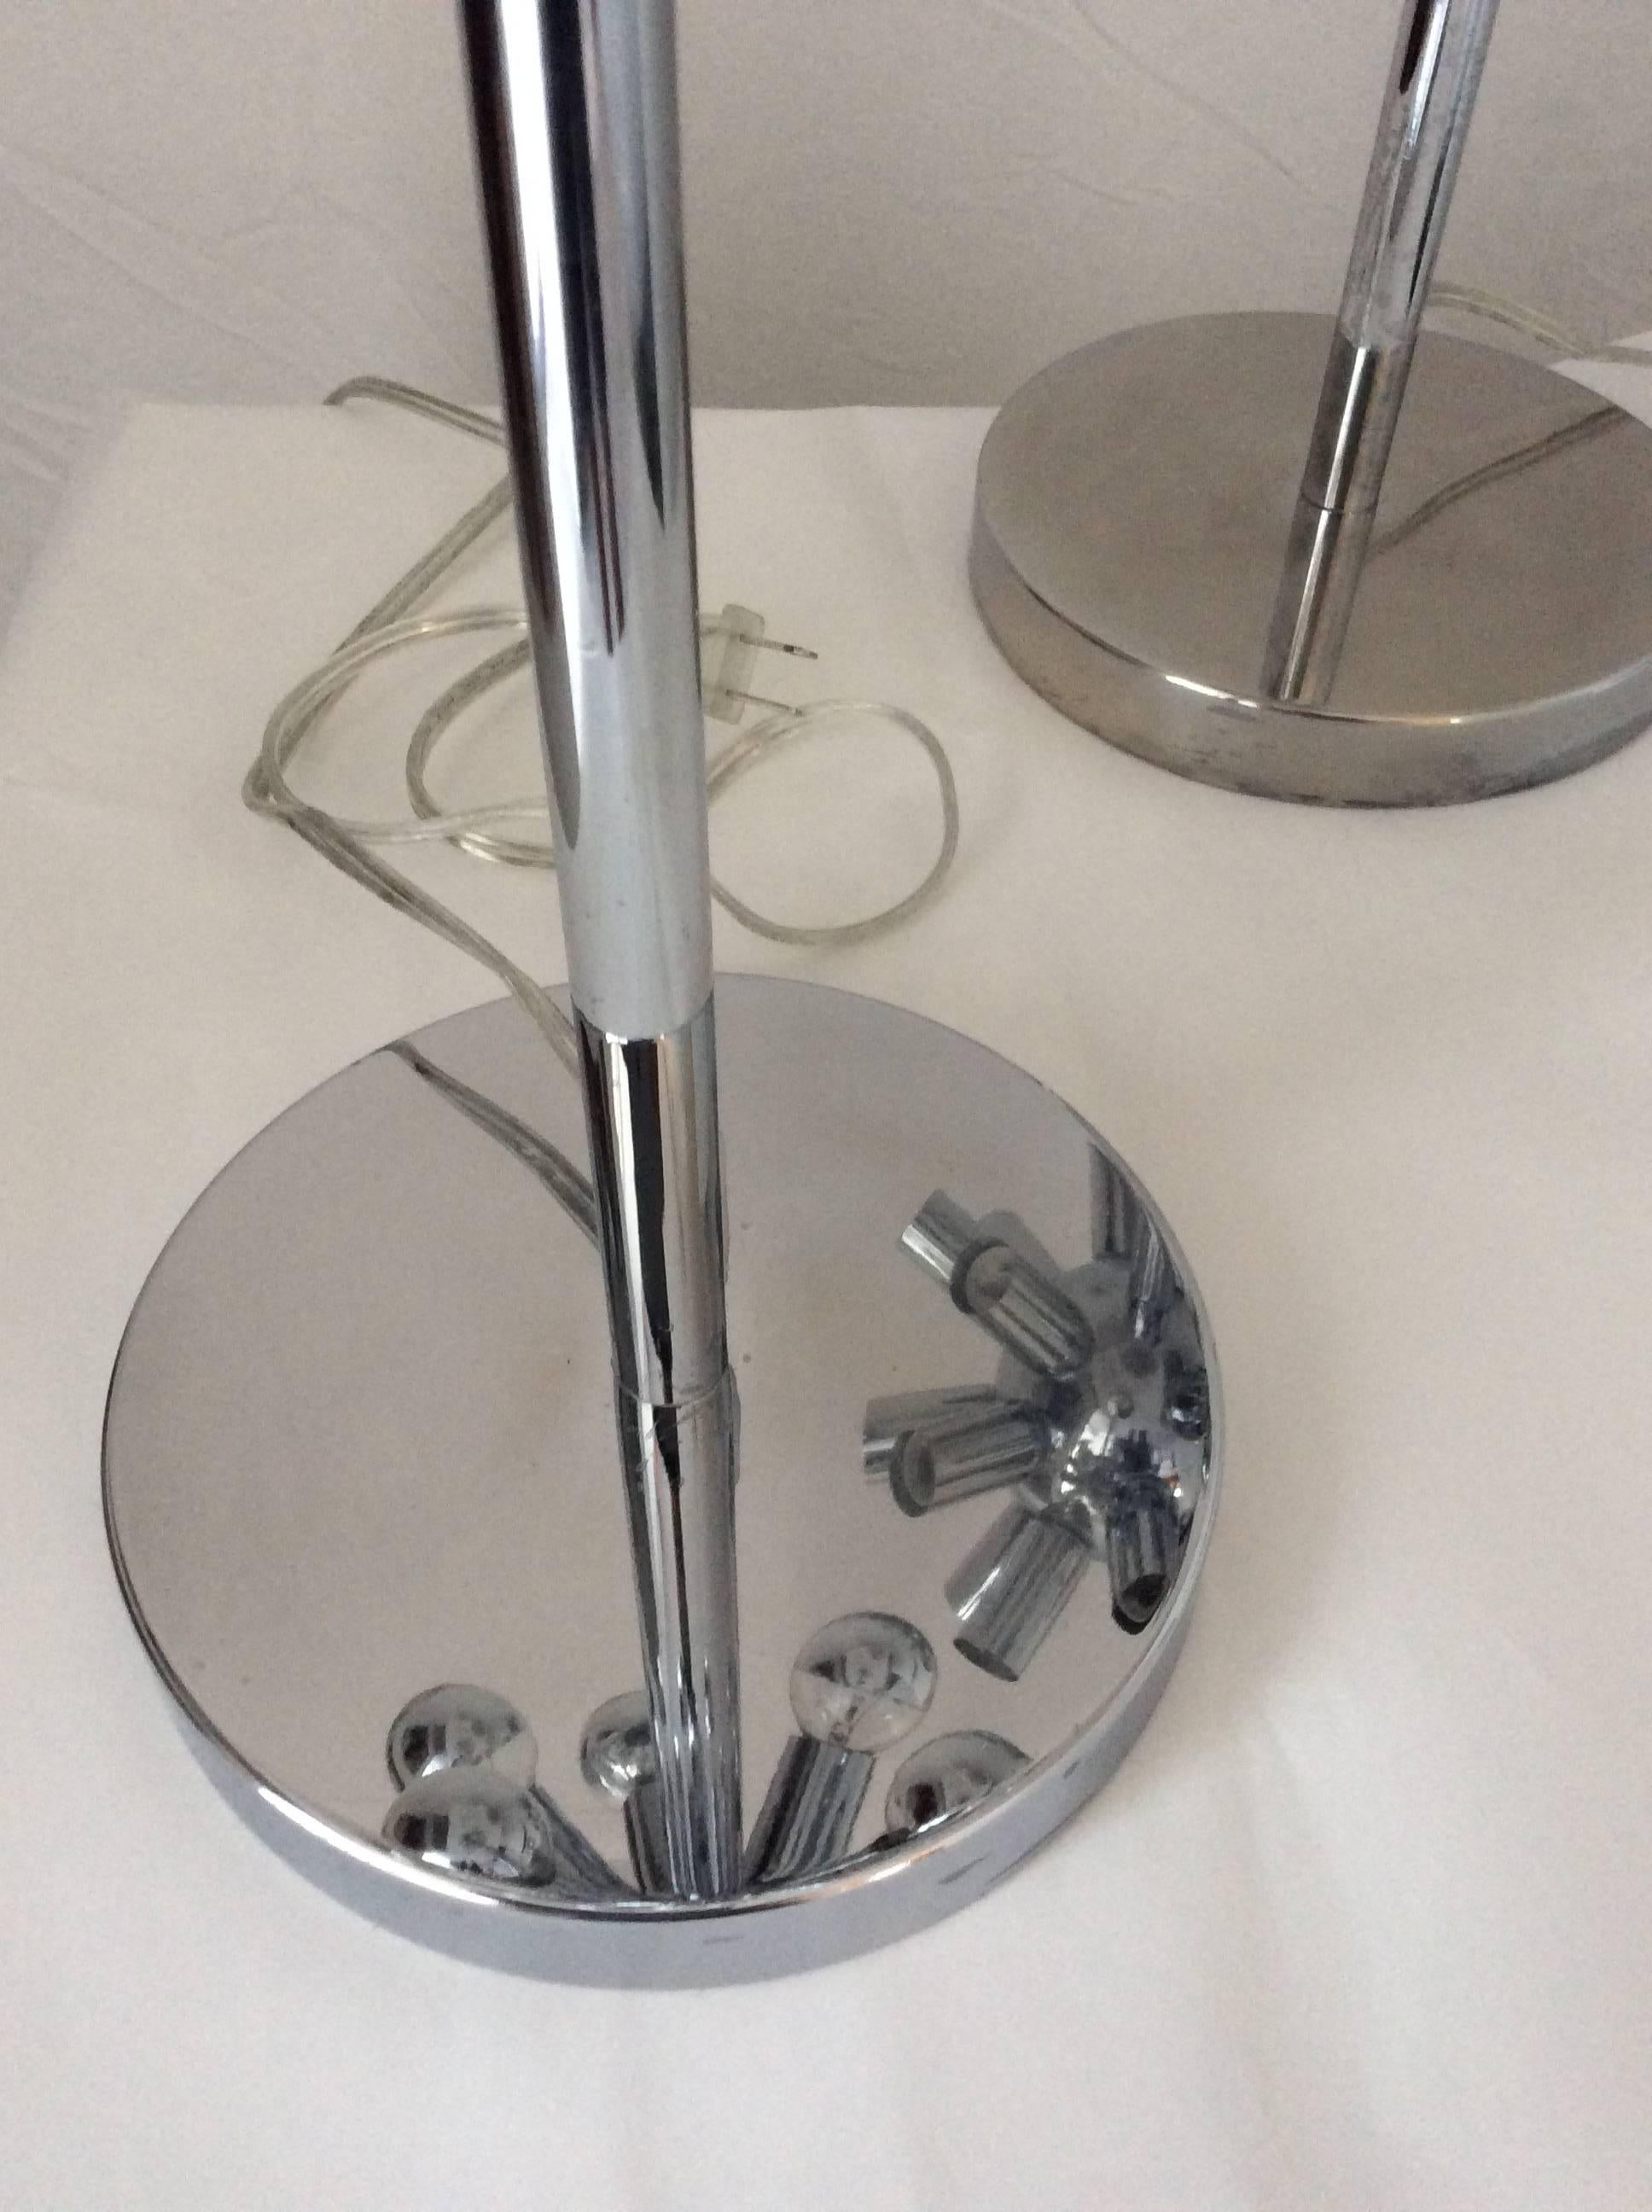 Plated Pair of Mid-Century Modern American Chrome Sputnik Table Lamps, Torino Style For Sale